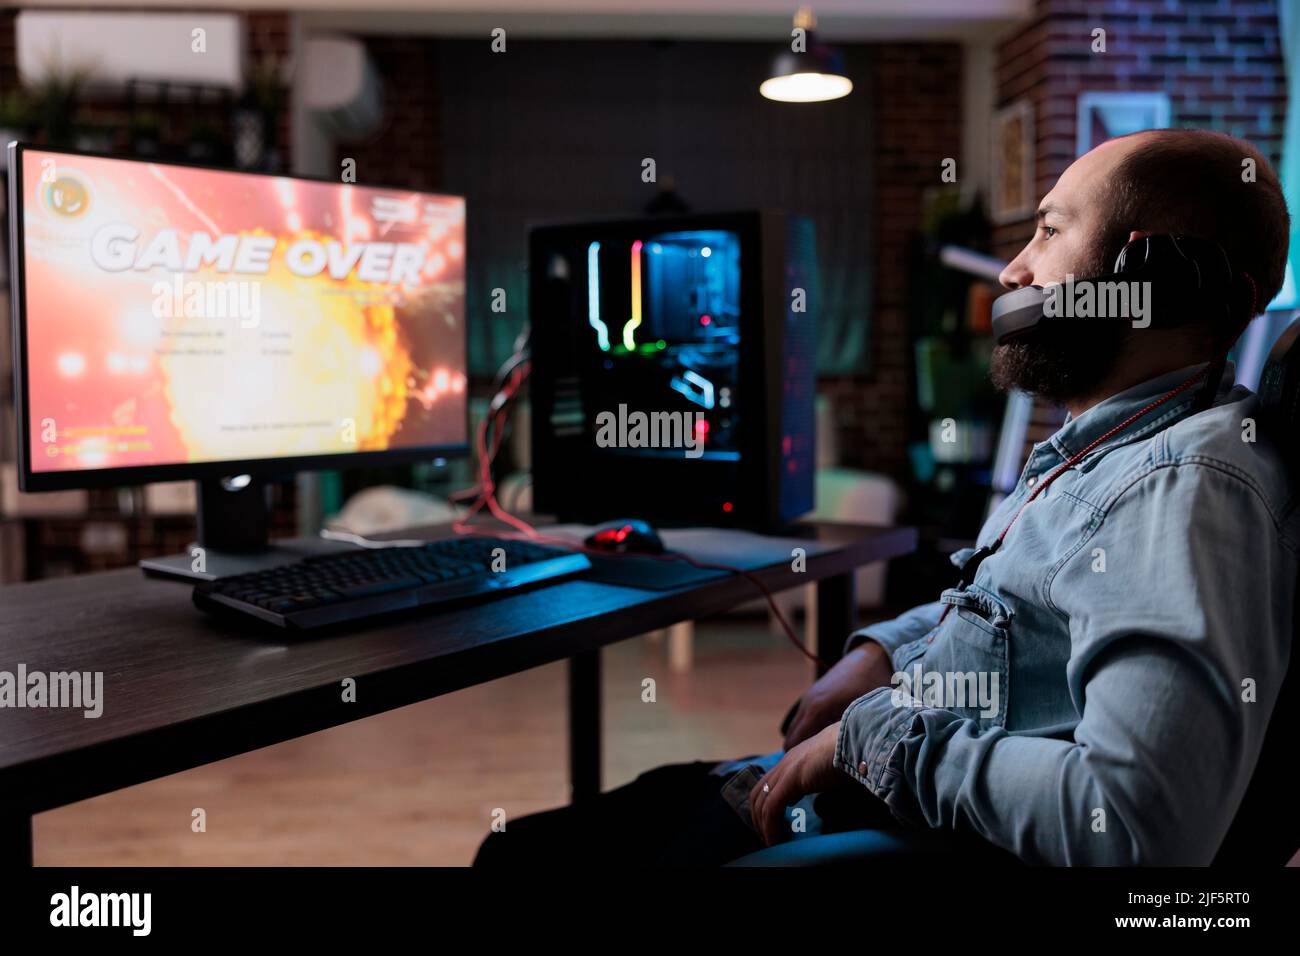 Caucasian man feeling frustrated about lost video games play using online streaming platform on computer. Male gamer playing action game and losing internet rpg tournament at desk with neon lights. Stock Photo